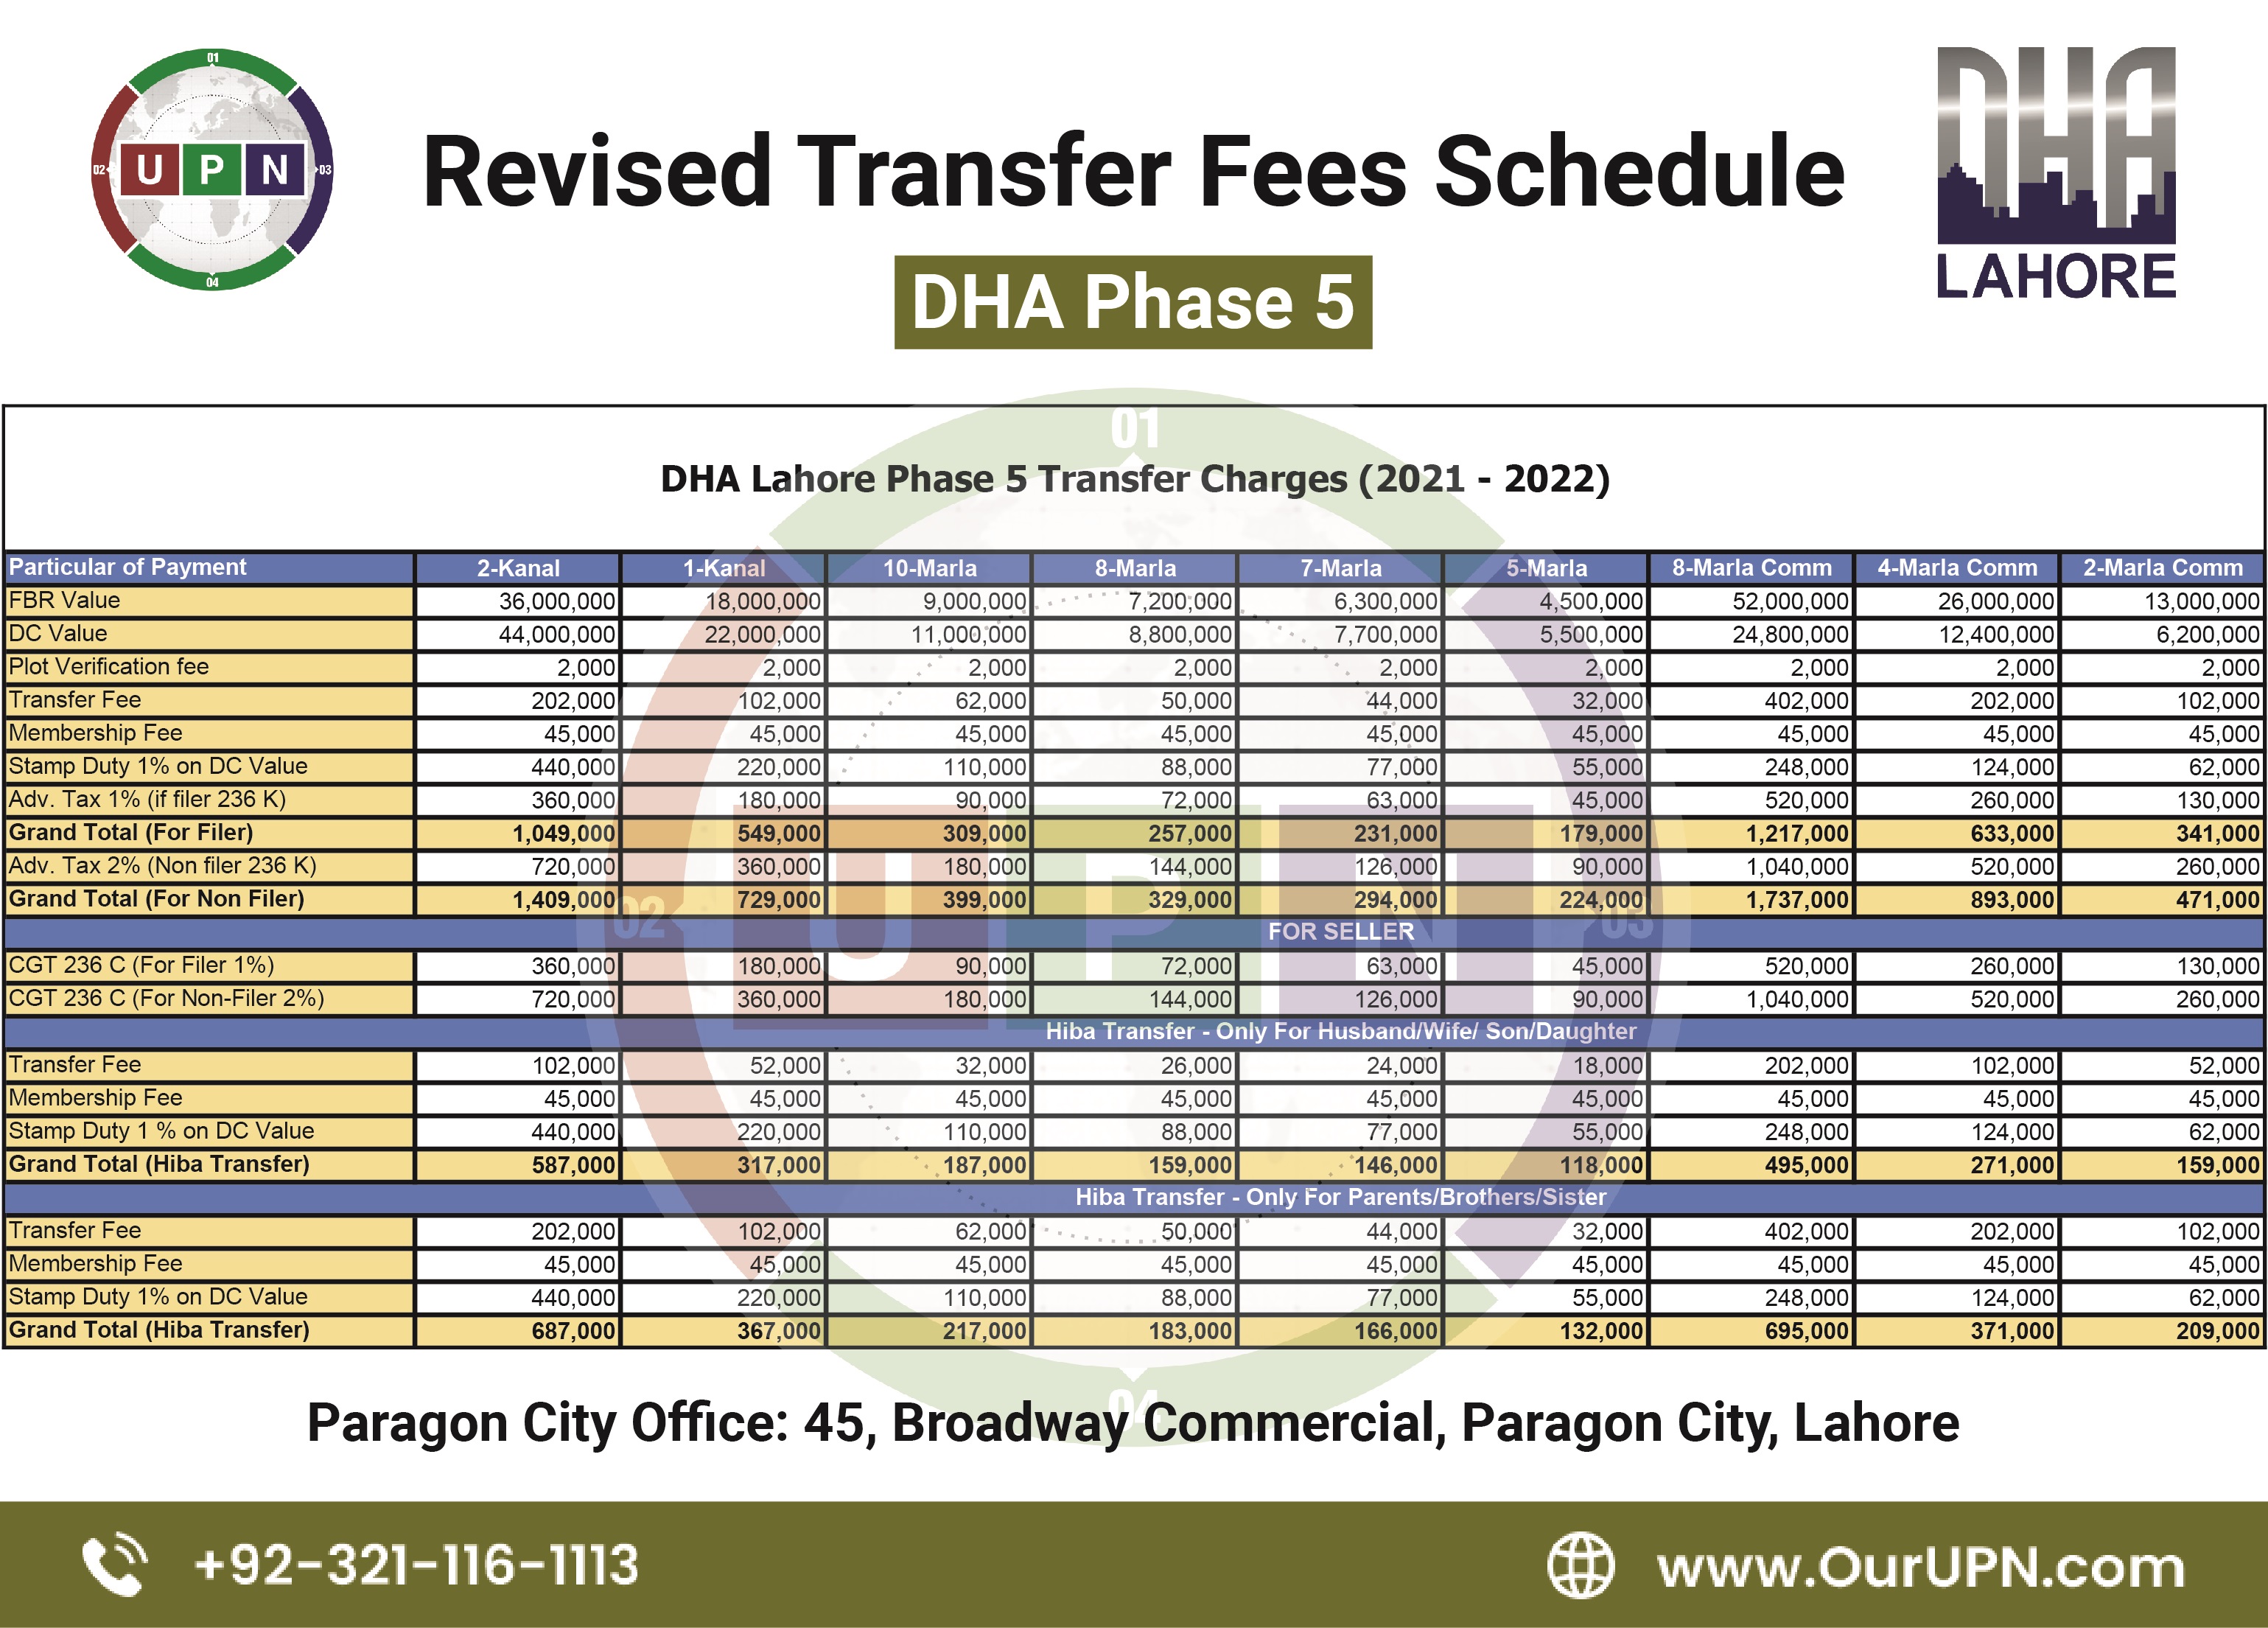 DHA LAHORE PHASE 5 Transfer fee Charges